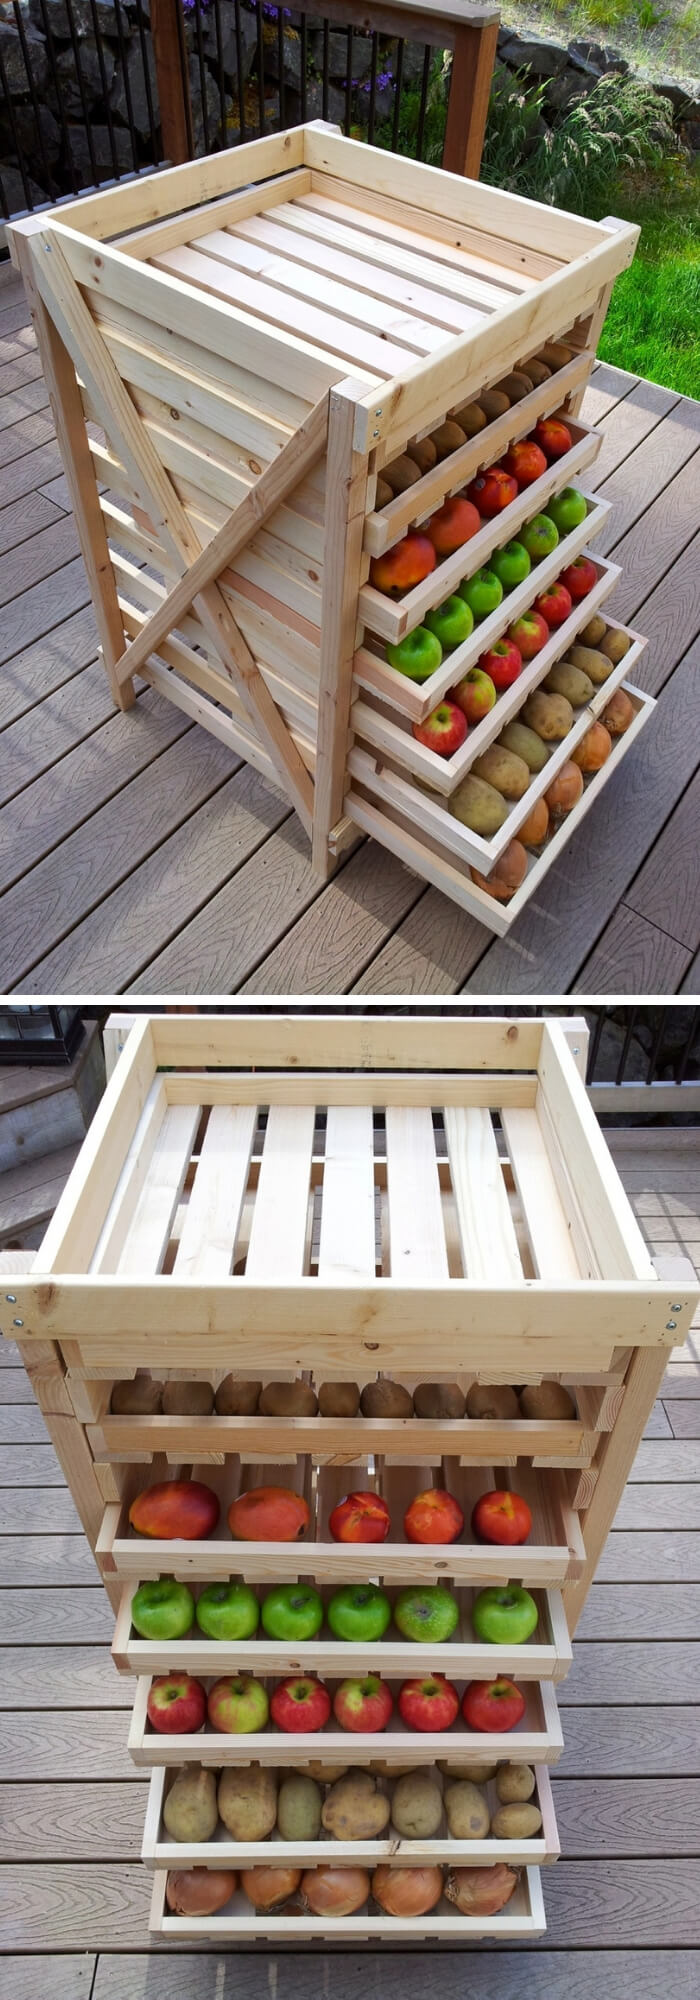 Food storage drying rack | Best Fruit and Vegetable Storage Ideas For Your Kitchen